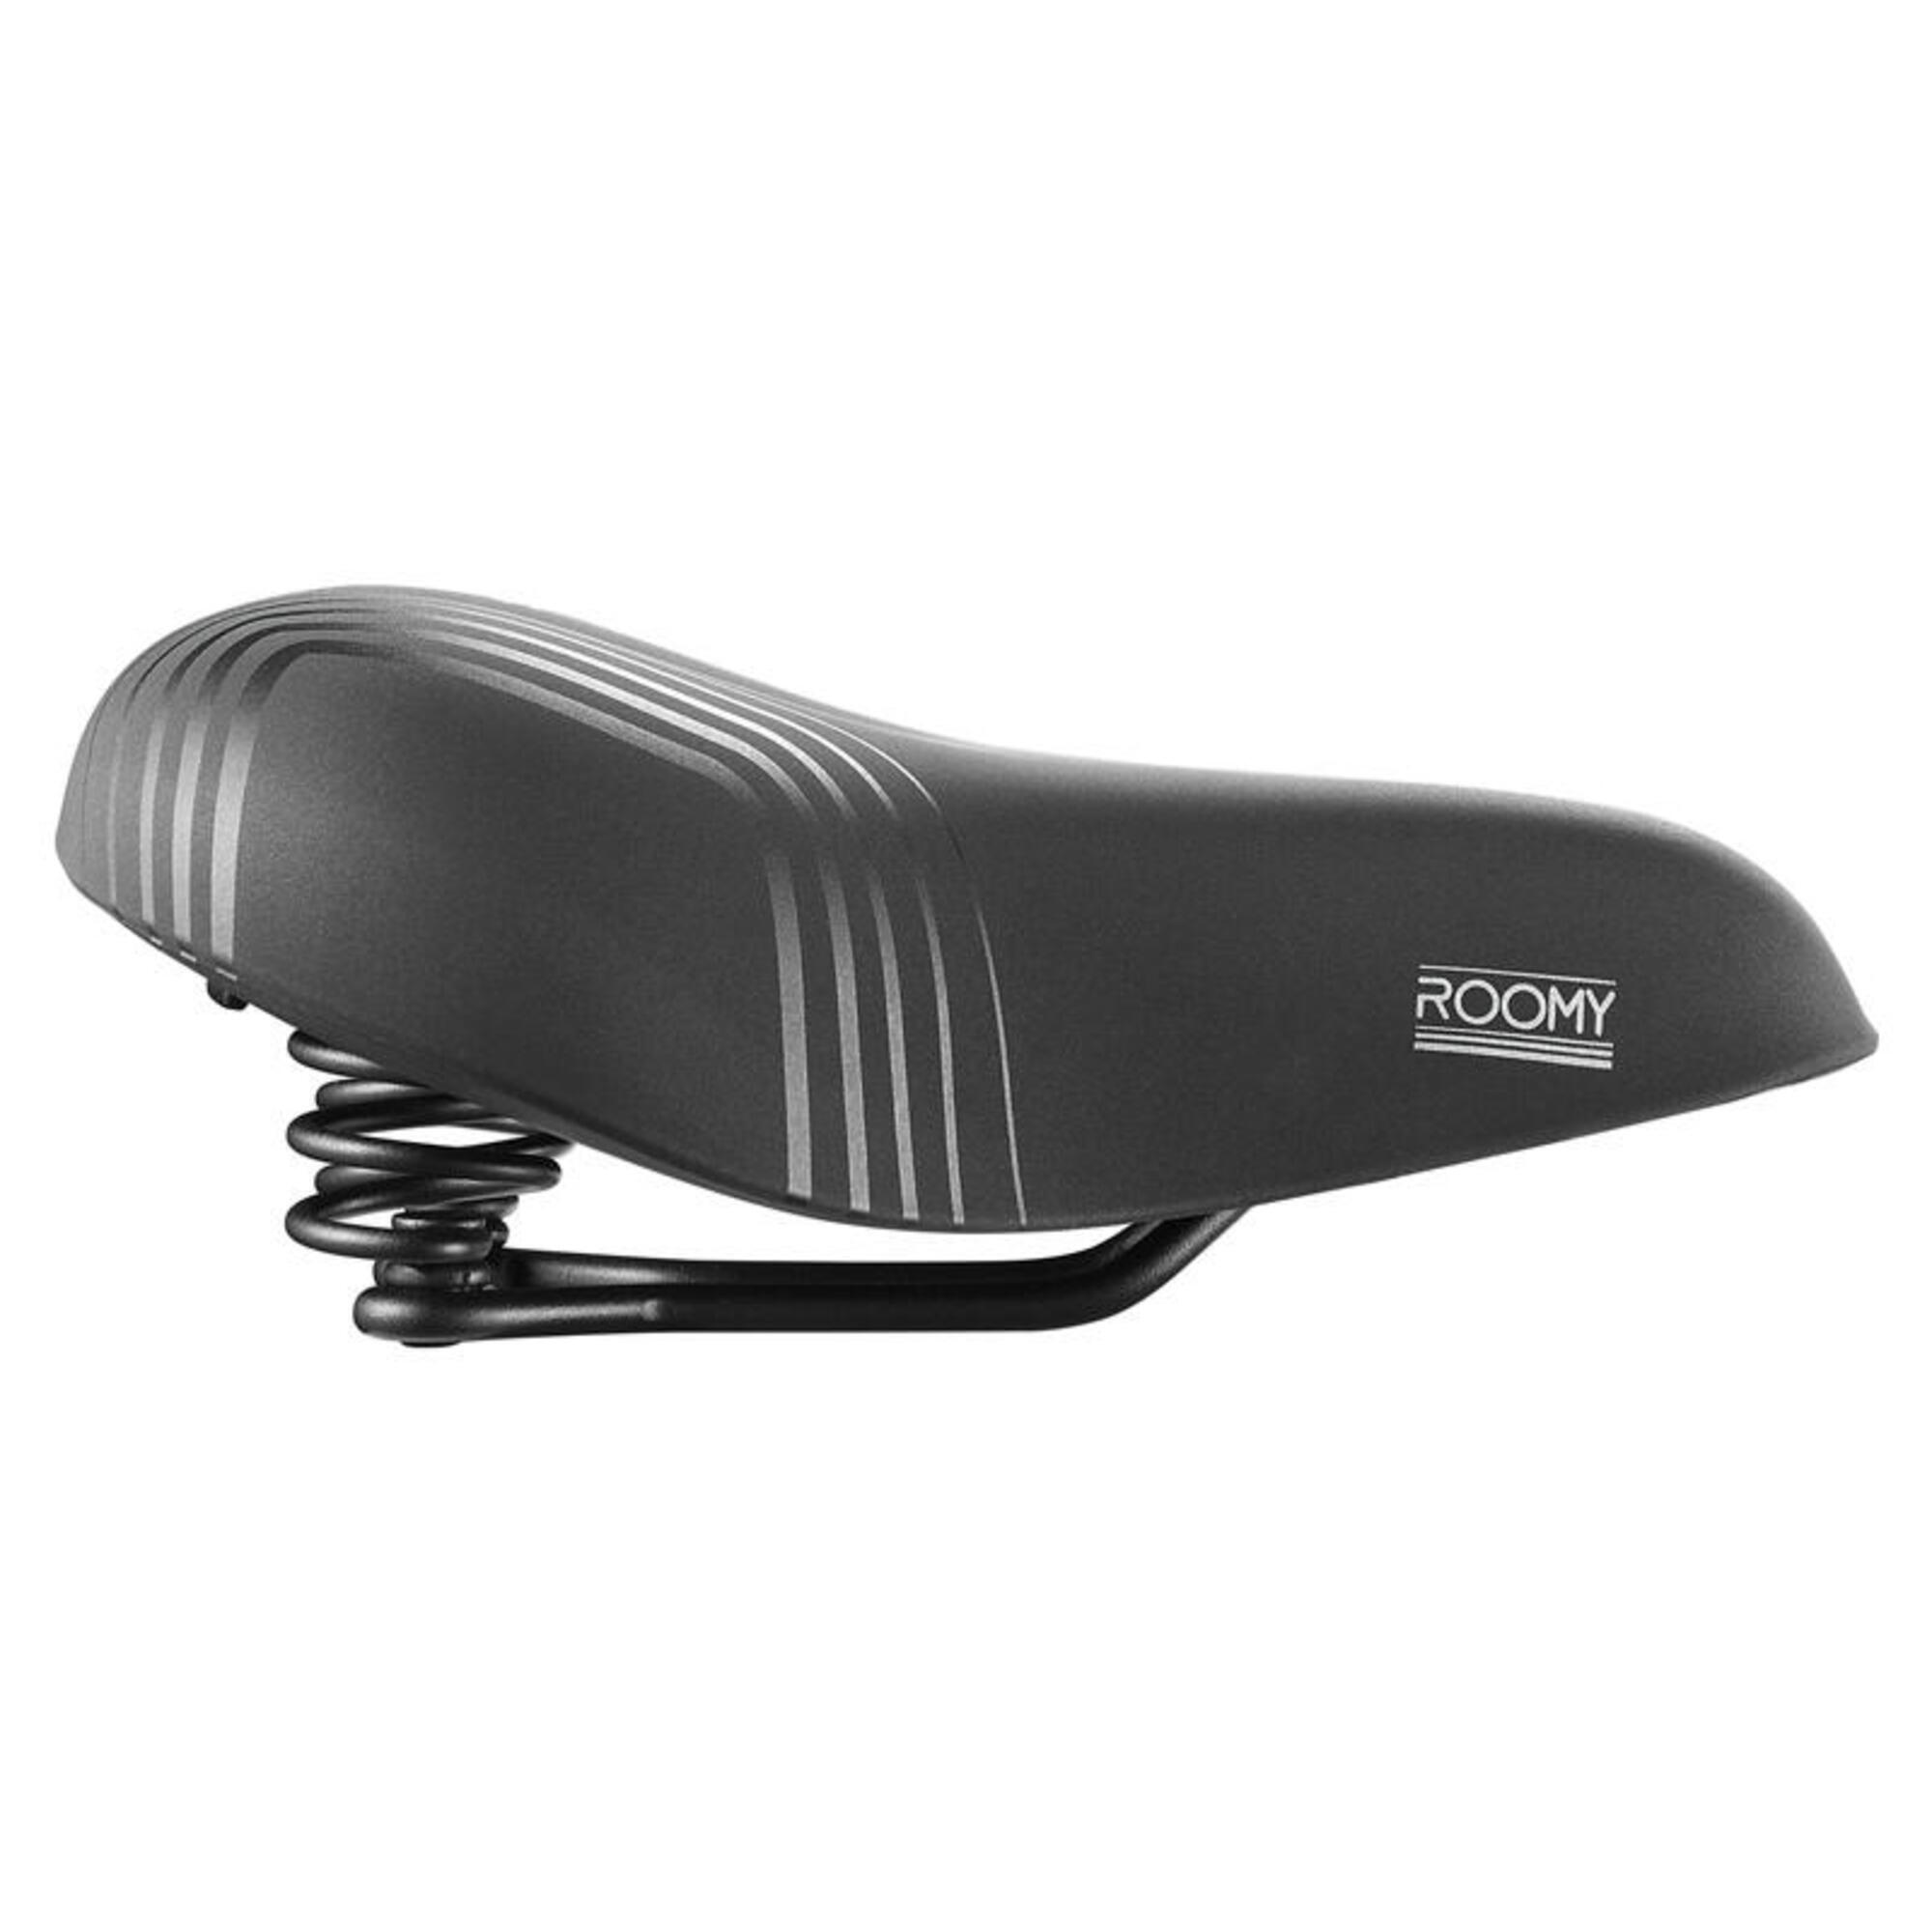 Siodełko Rowerowe Selle Royal Classic Relaxed 90St. Roomy Unisex